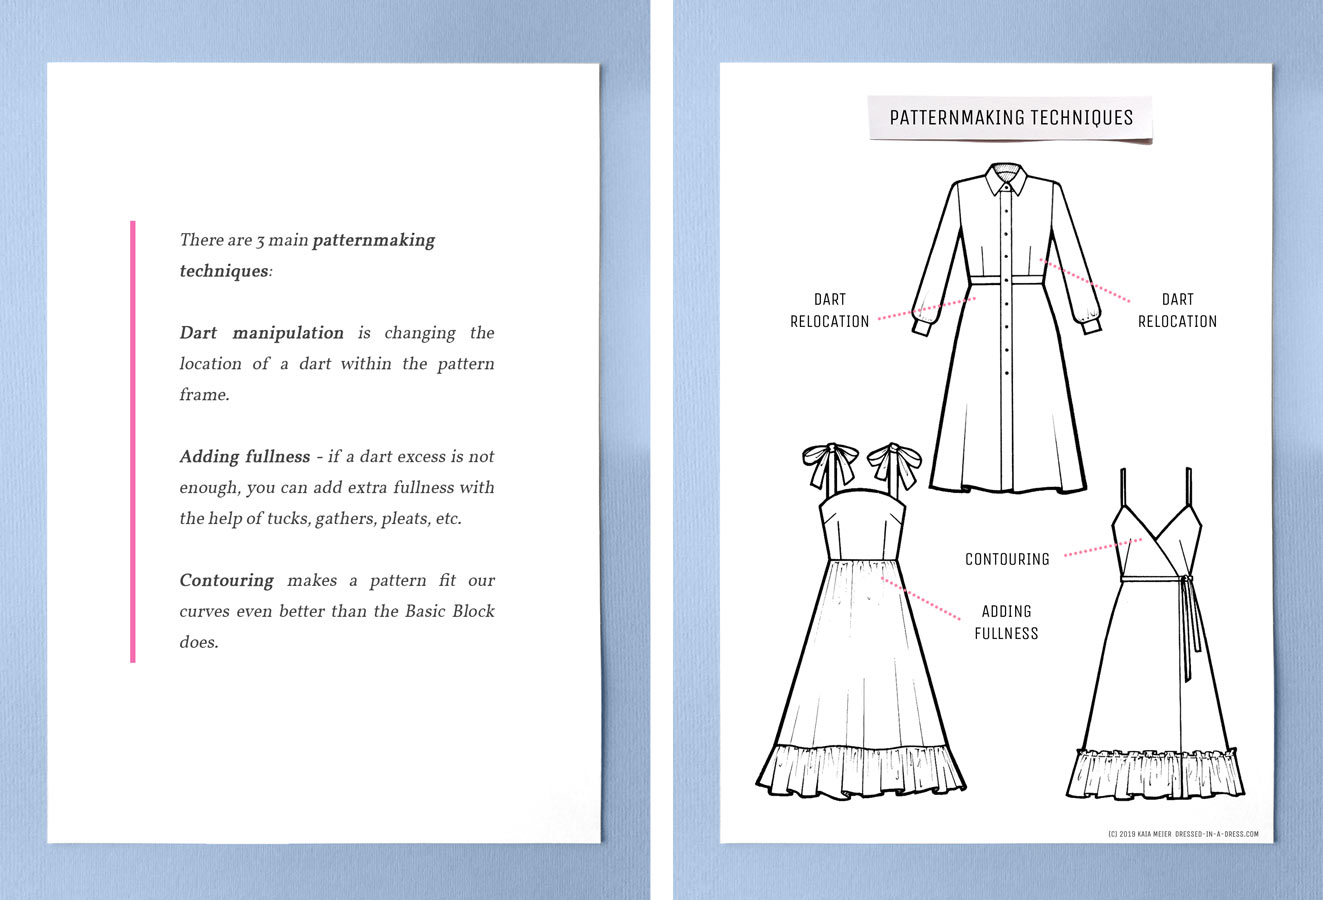 Learn Dress Making and Designing - 6 Piece Dress , Pattern Making, Cutting  and Stitching, Click Link for Tutorial : https://youtu.be/aG2tA-xcH28 |  Facebook